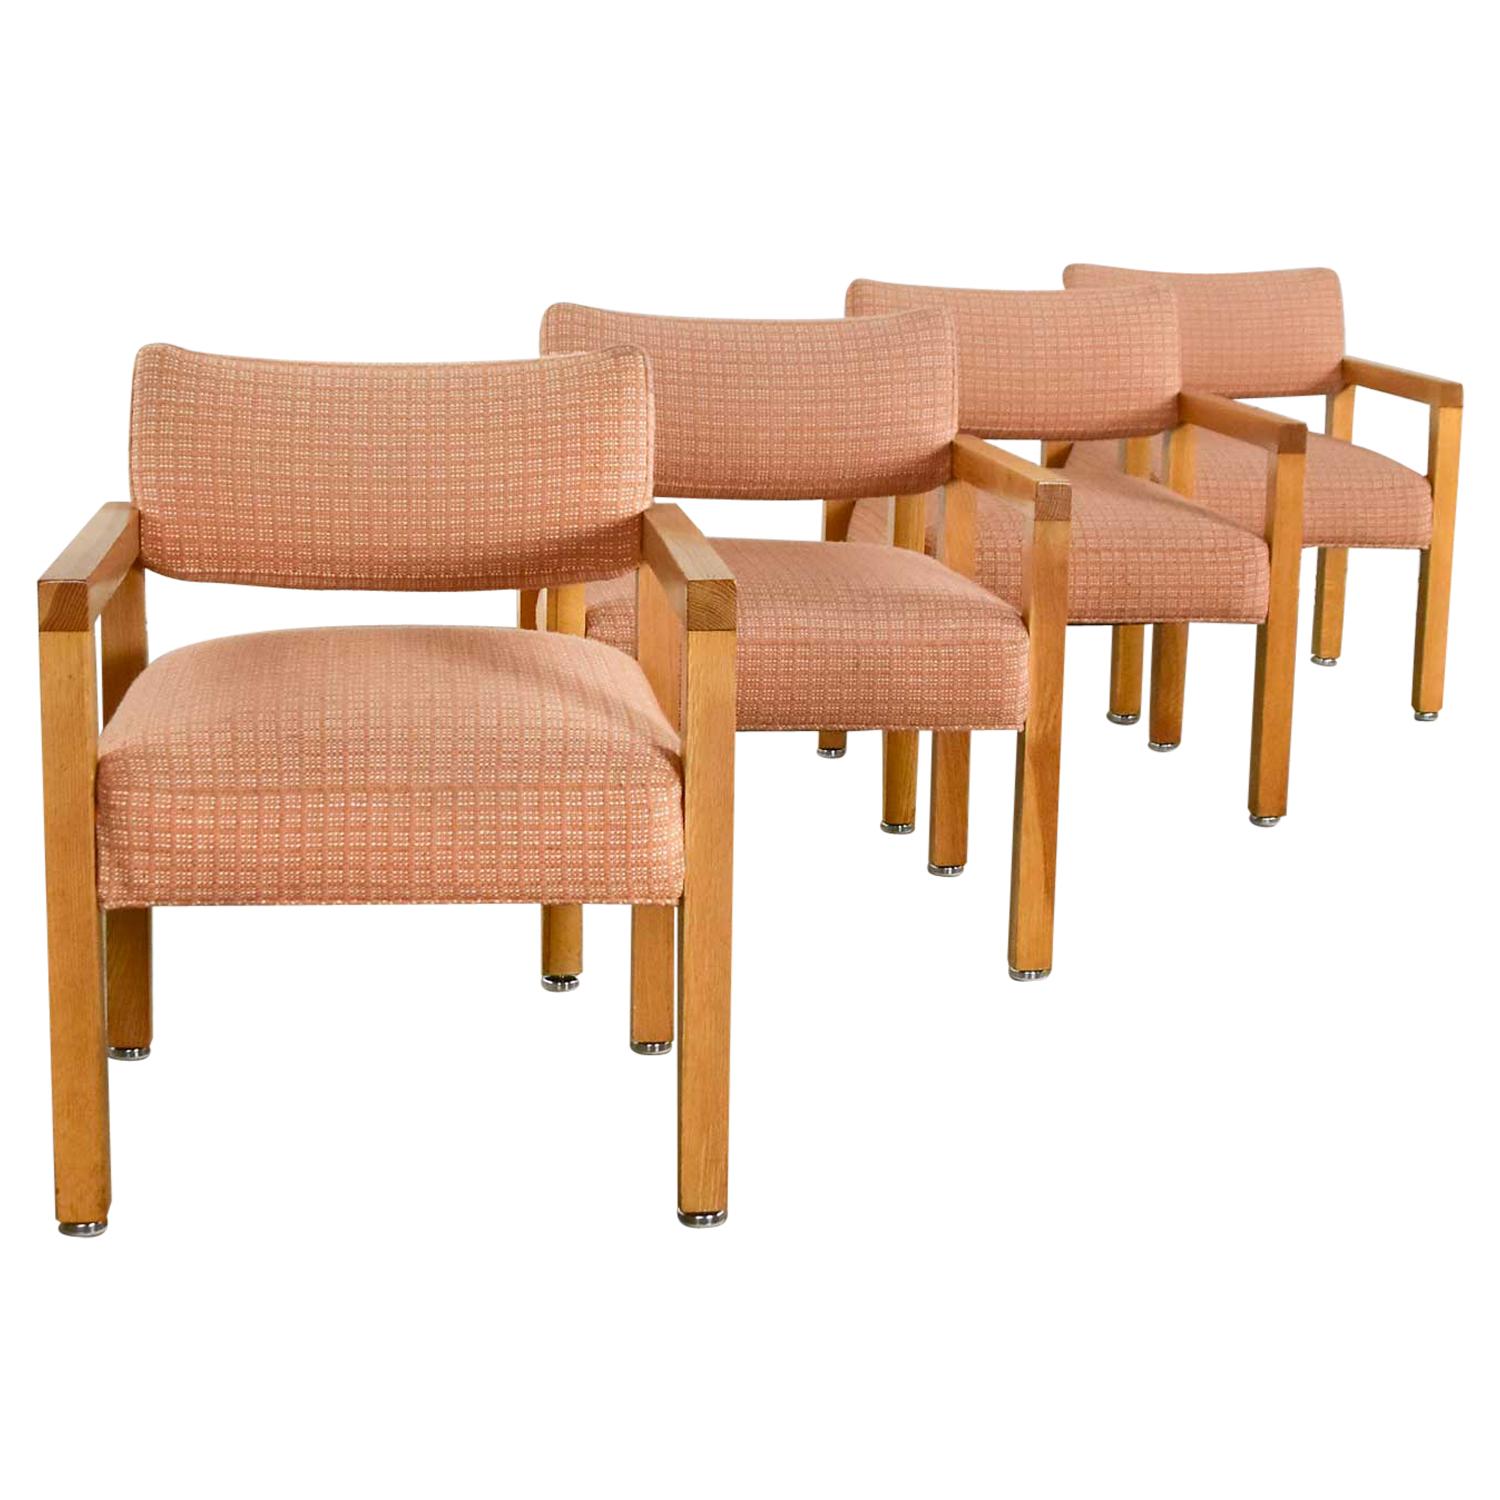 Modern Square Frame Oak Armchairs with Original Blush Textured Fabric, Set of 4